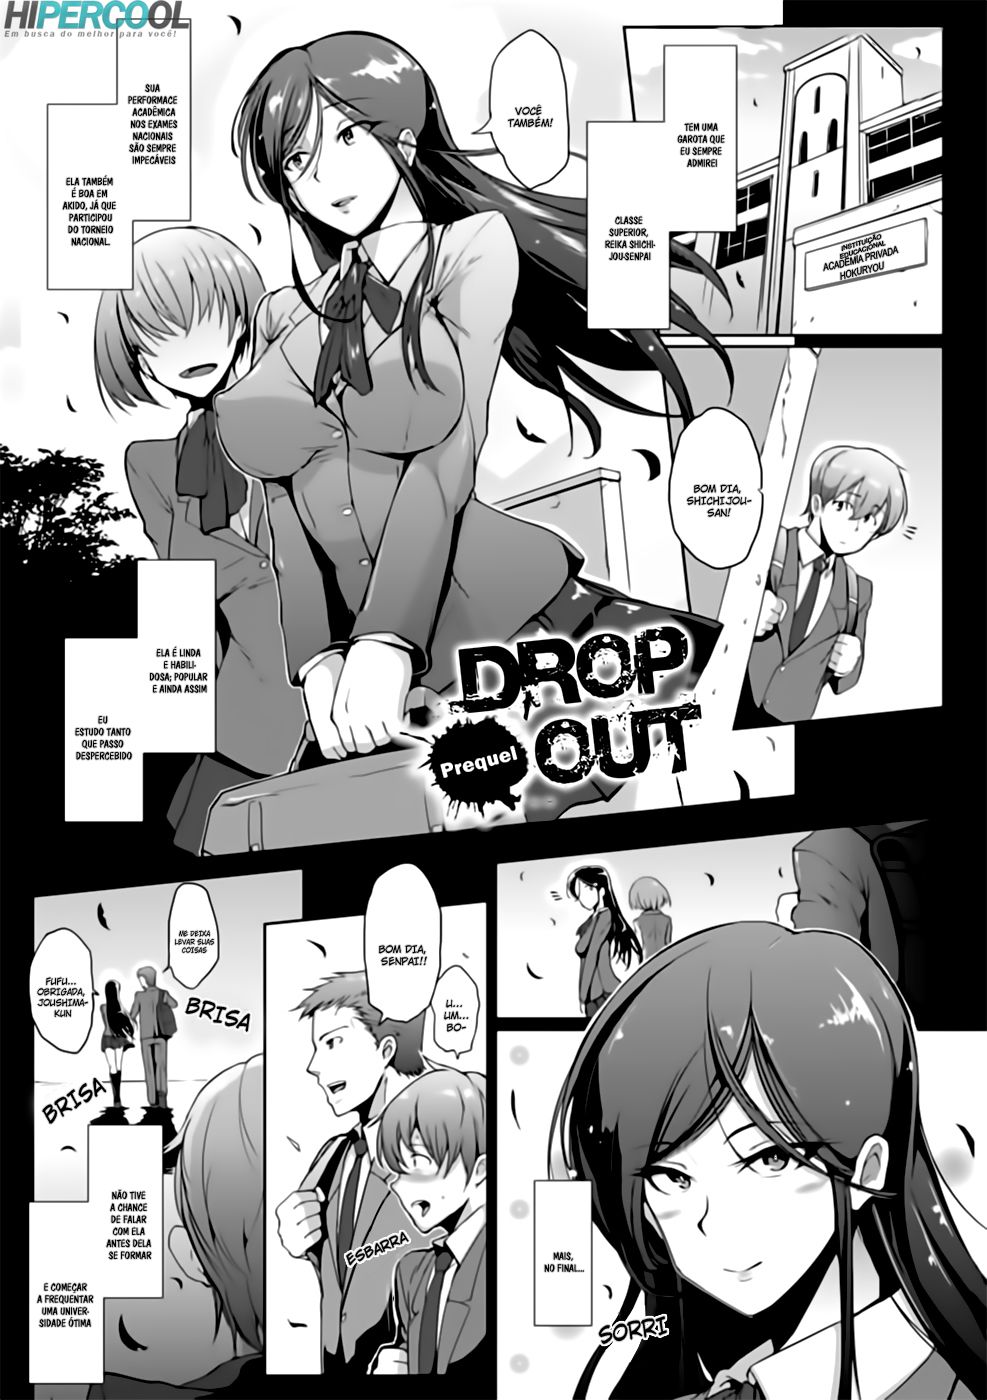 Dropout Capitulo 1